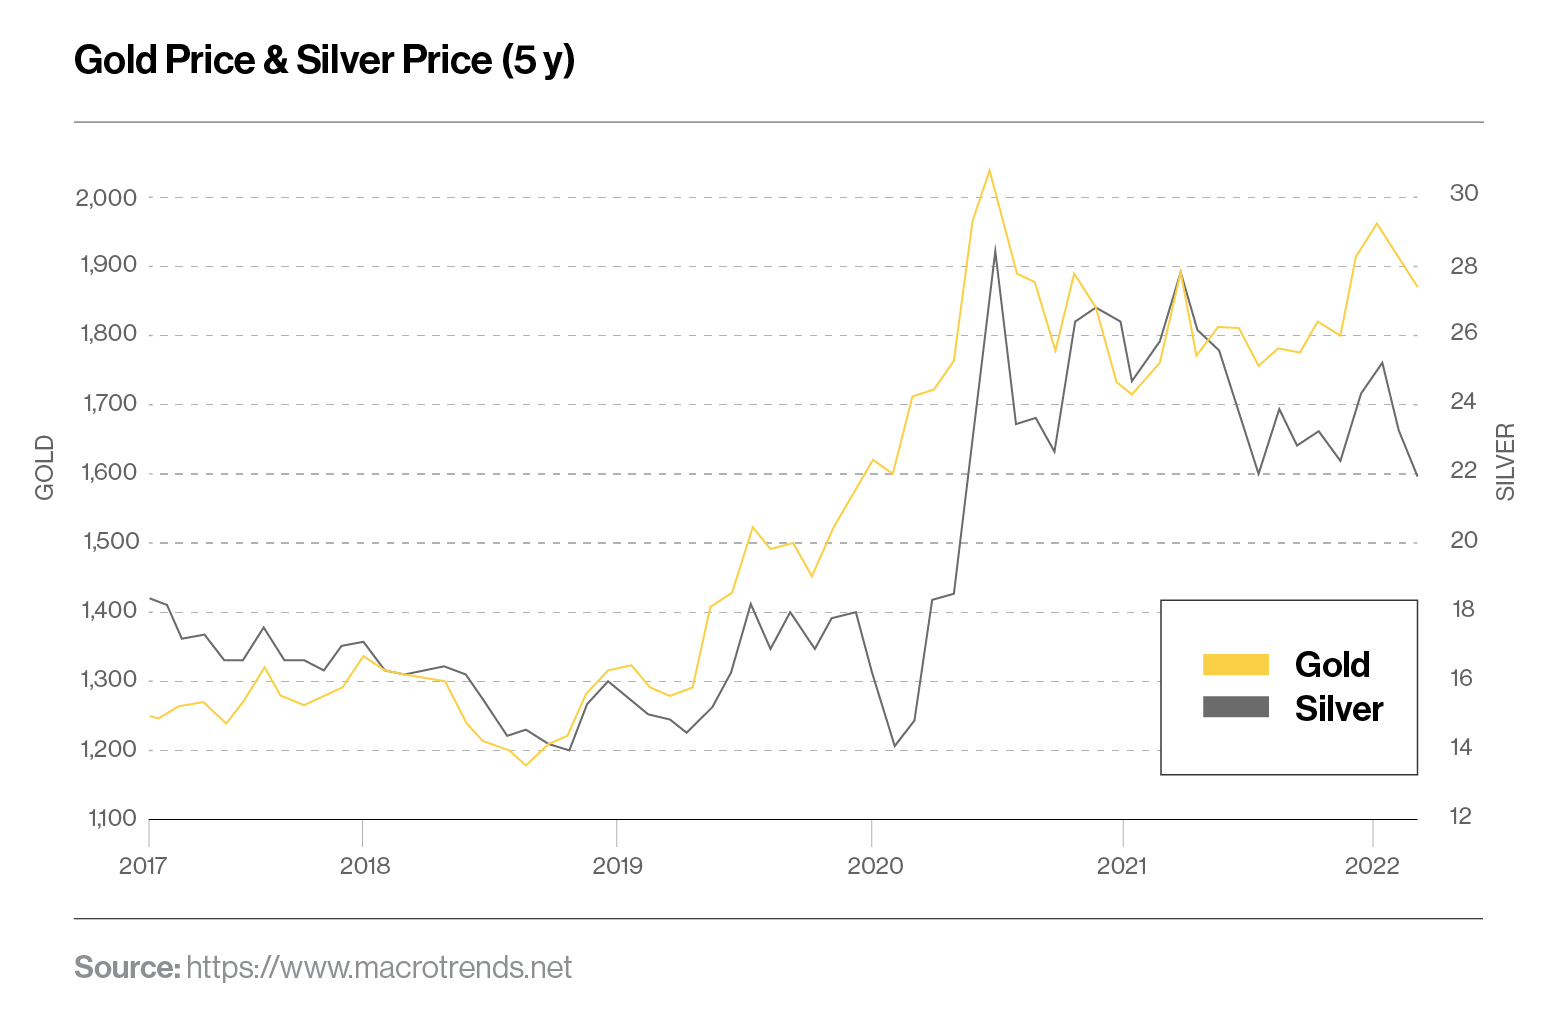 Gold price and Silver price